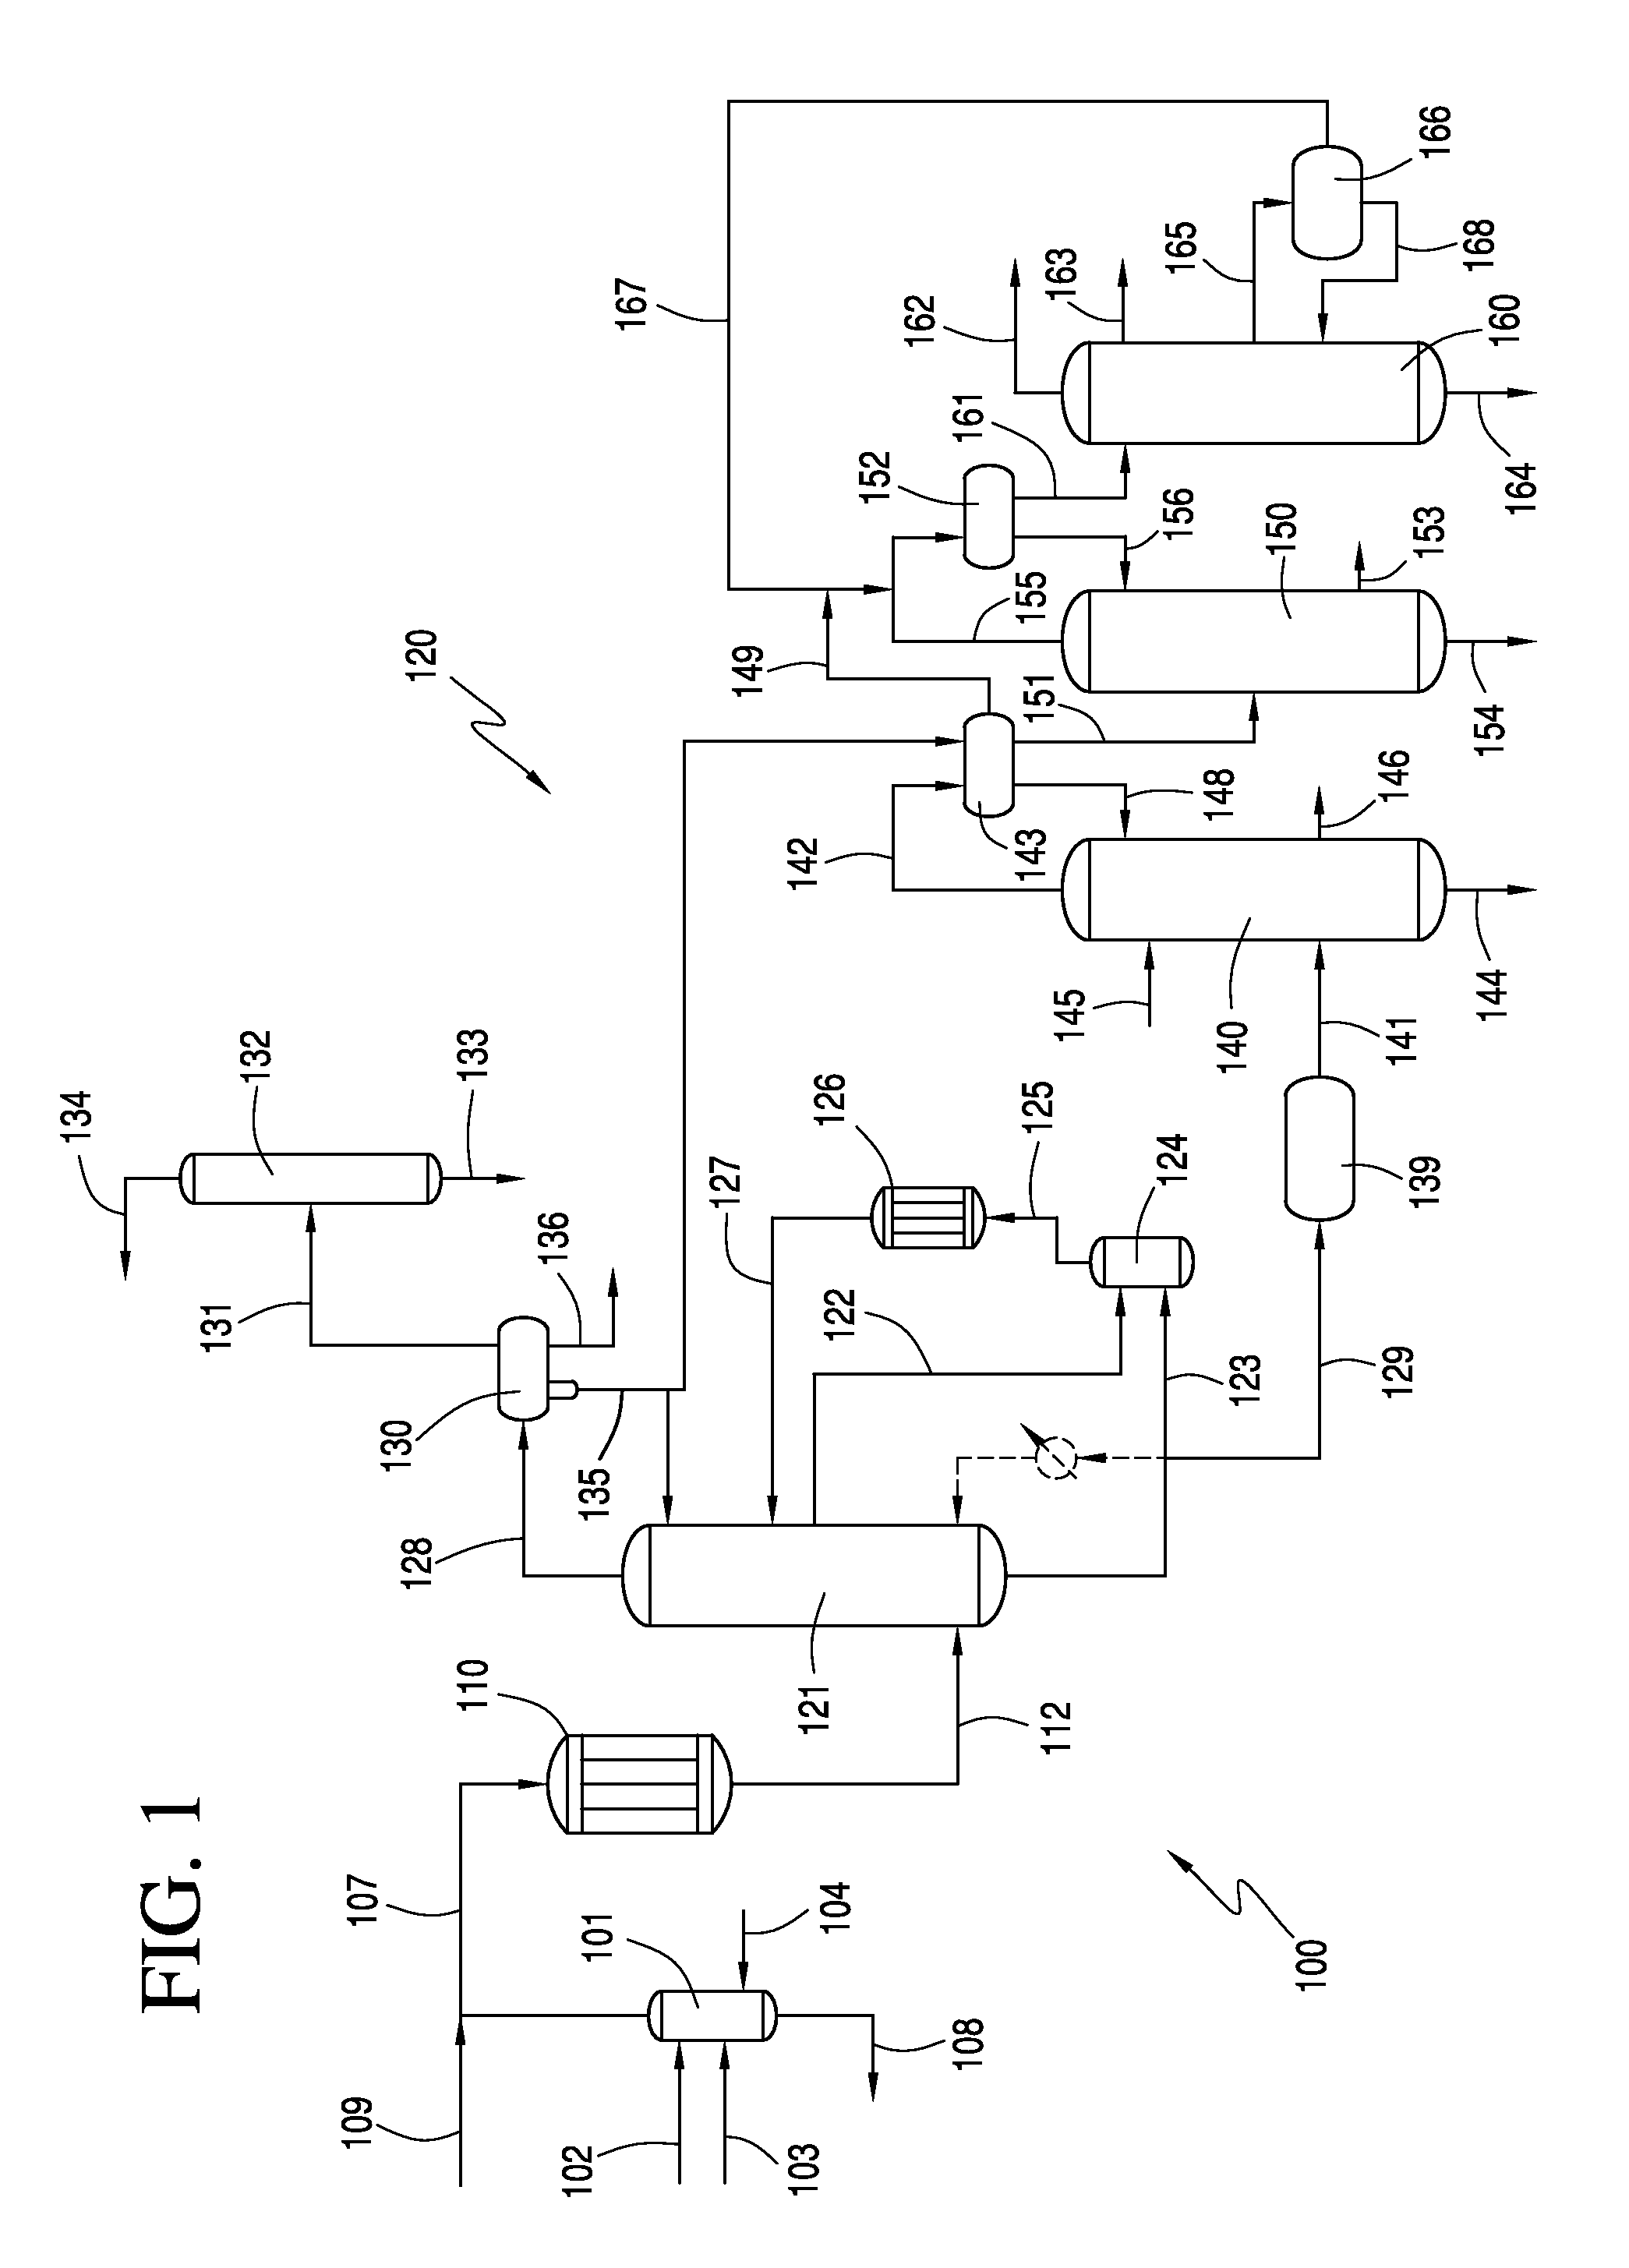 Process for vinyl acetate production having sidecar reactor for predehydrating column